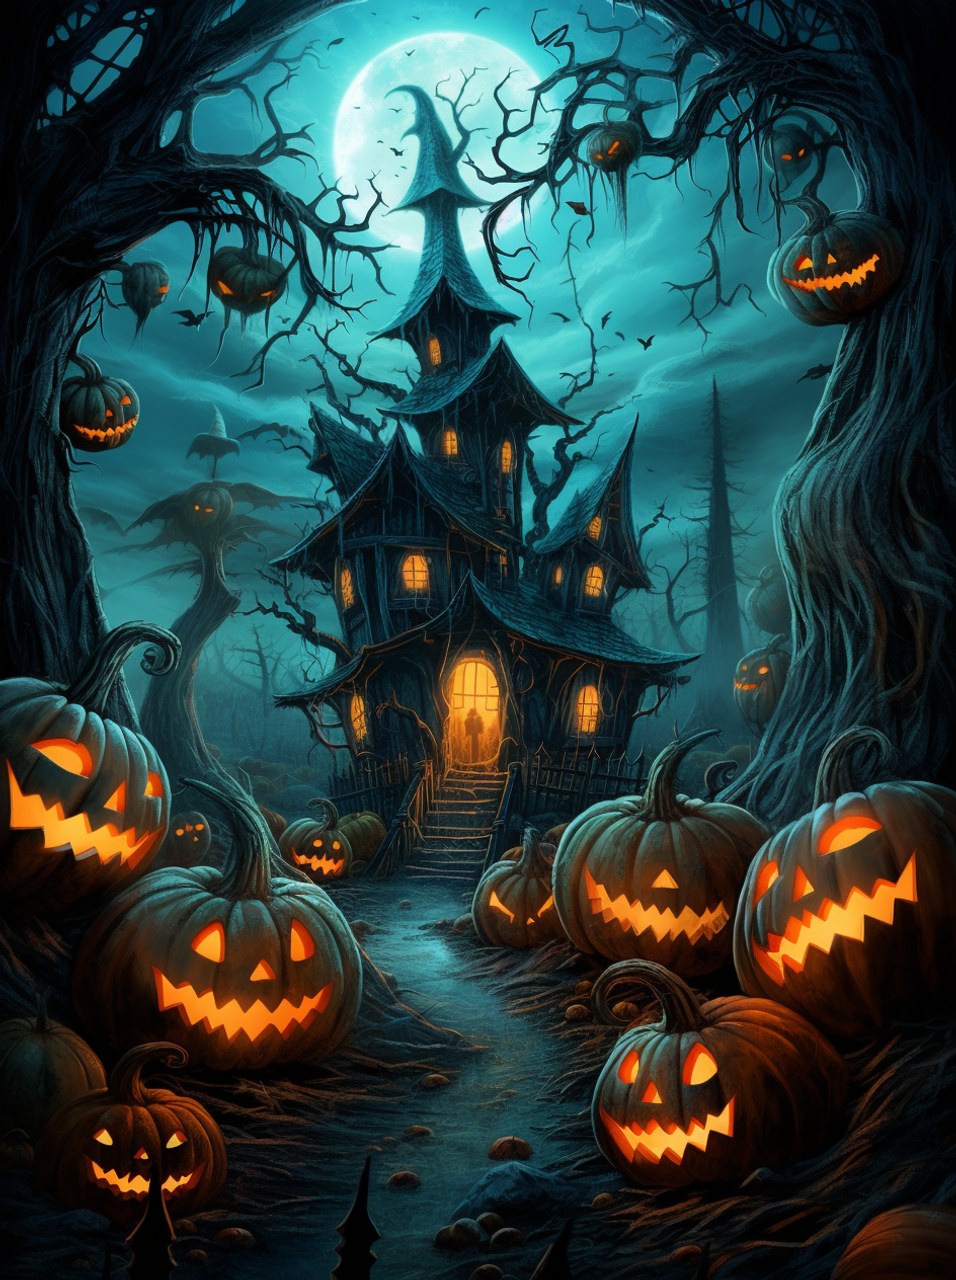 https://cdn11.bigcommerce.com/s-xf1j2e32mt/images/stencil/1280x1280/products/25062/36390/fullmoonhalloweenhouse__32539.1695866674.png?c=1